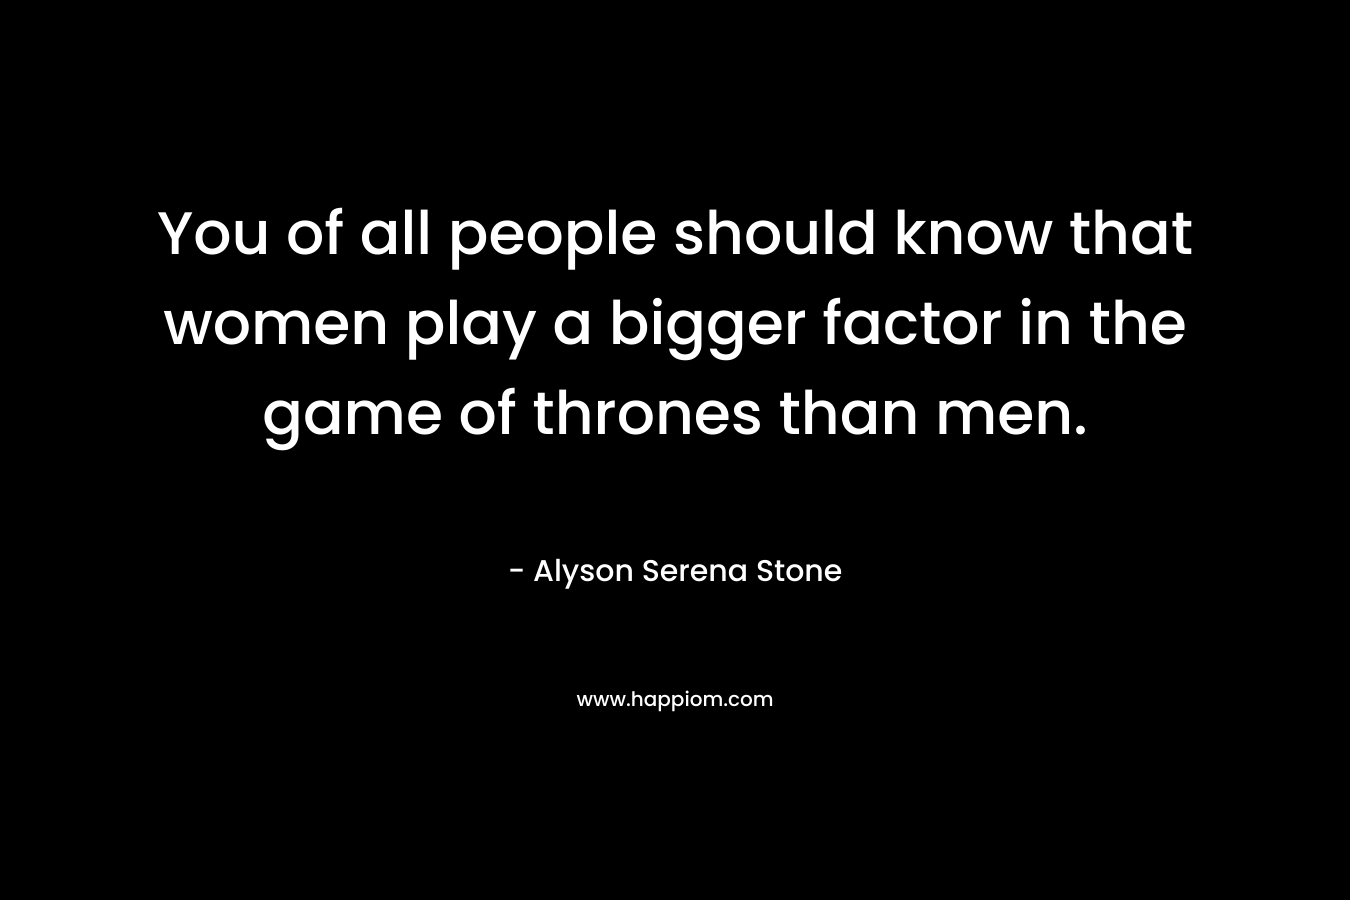 You of all people should know that women play a bigger factor in the game of thrones than men.